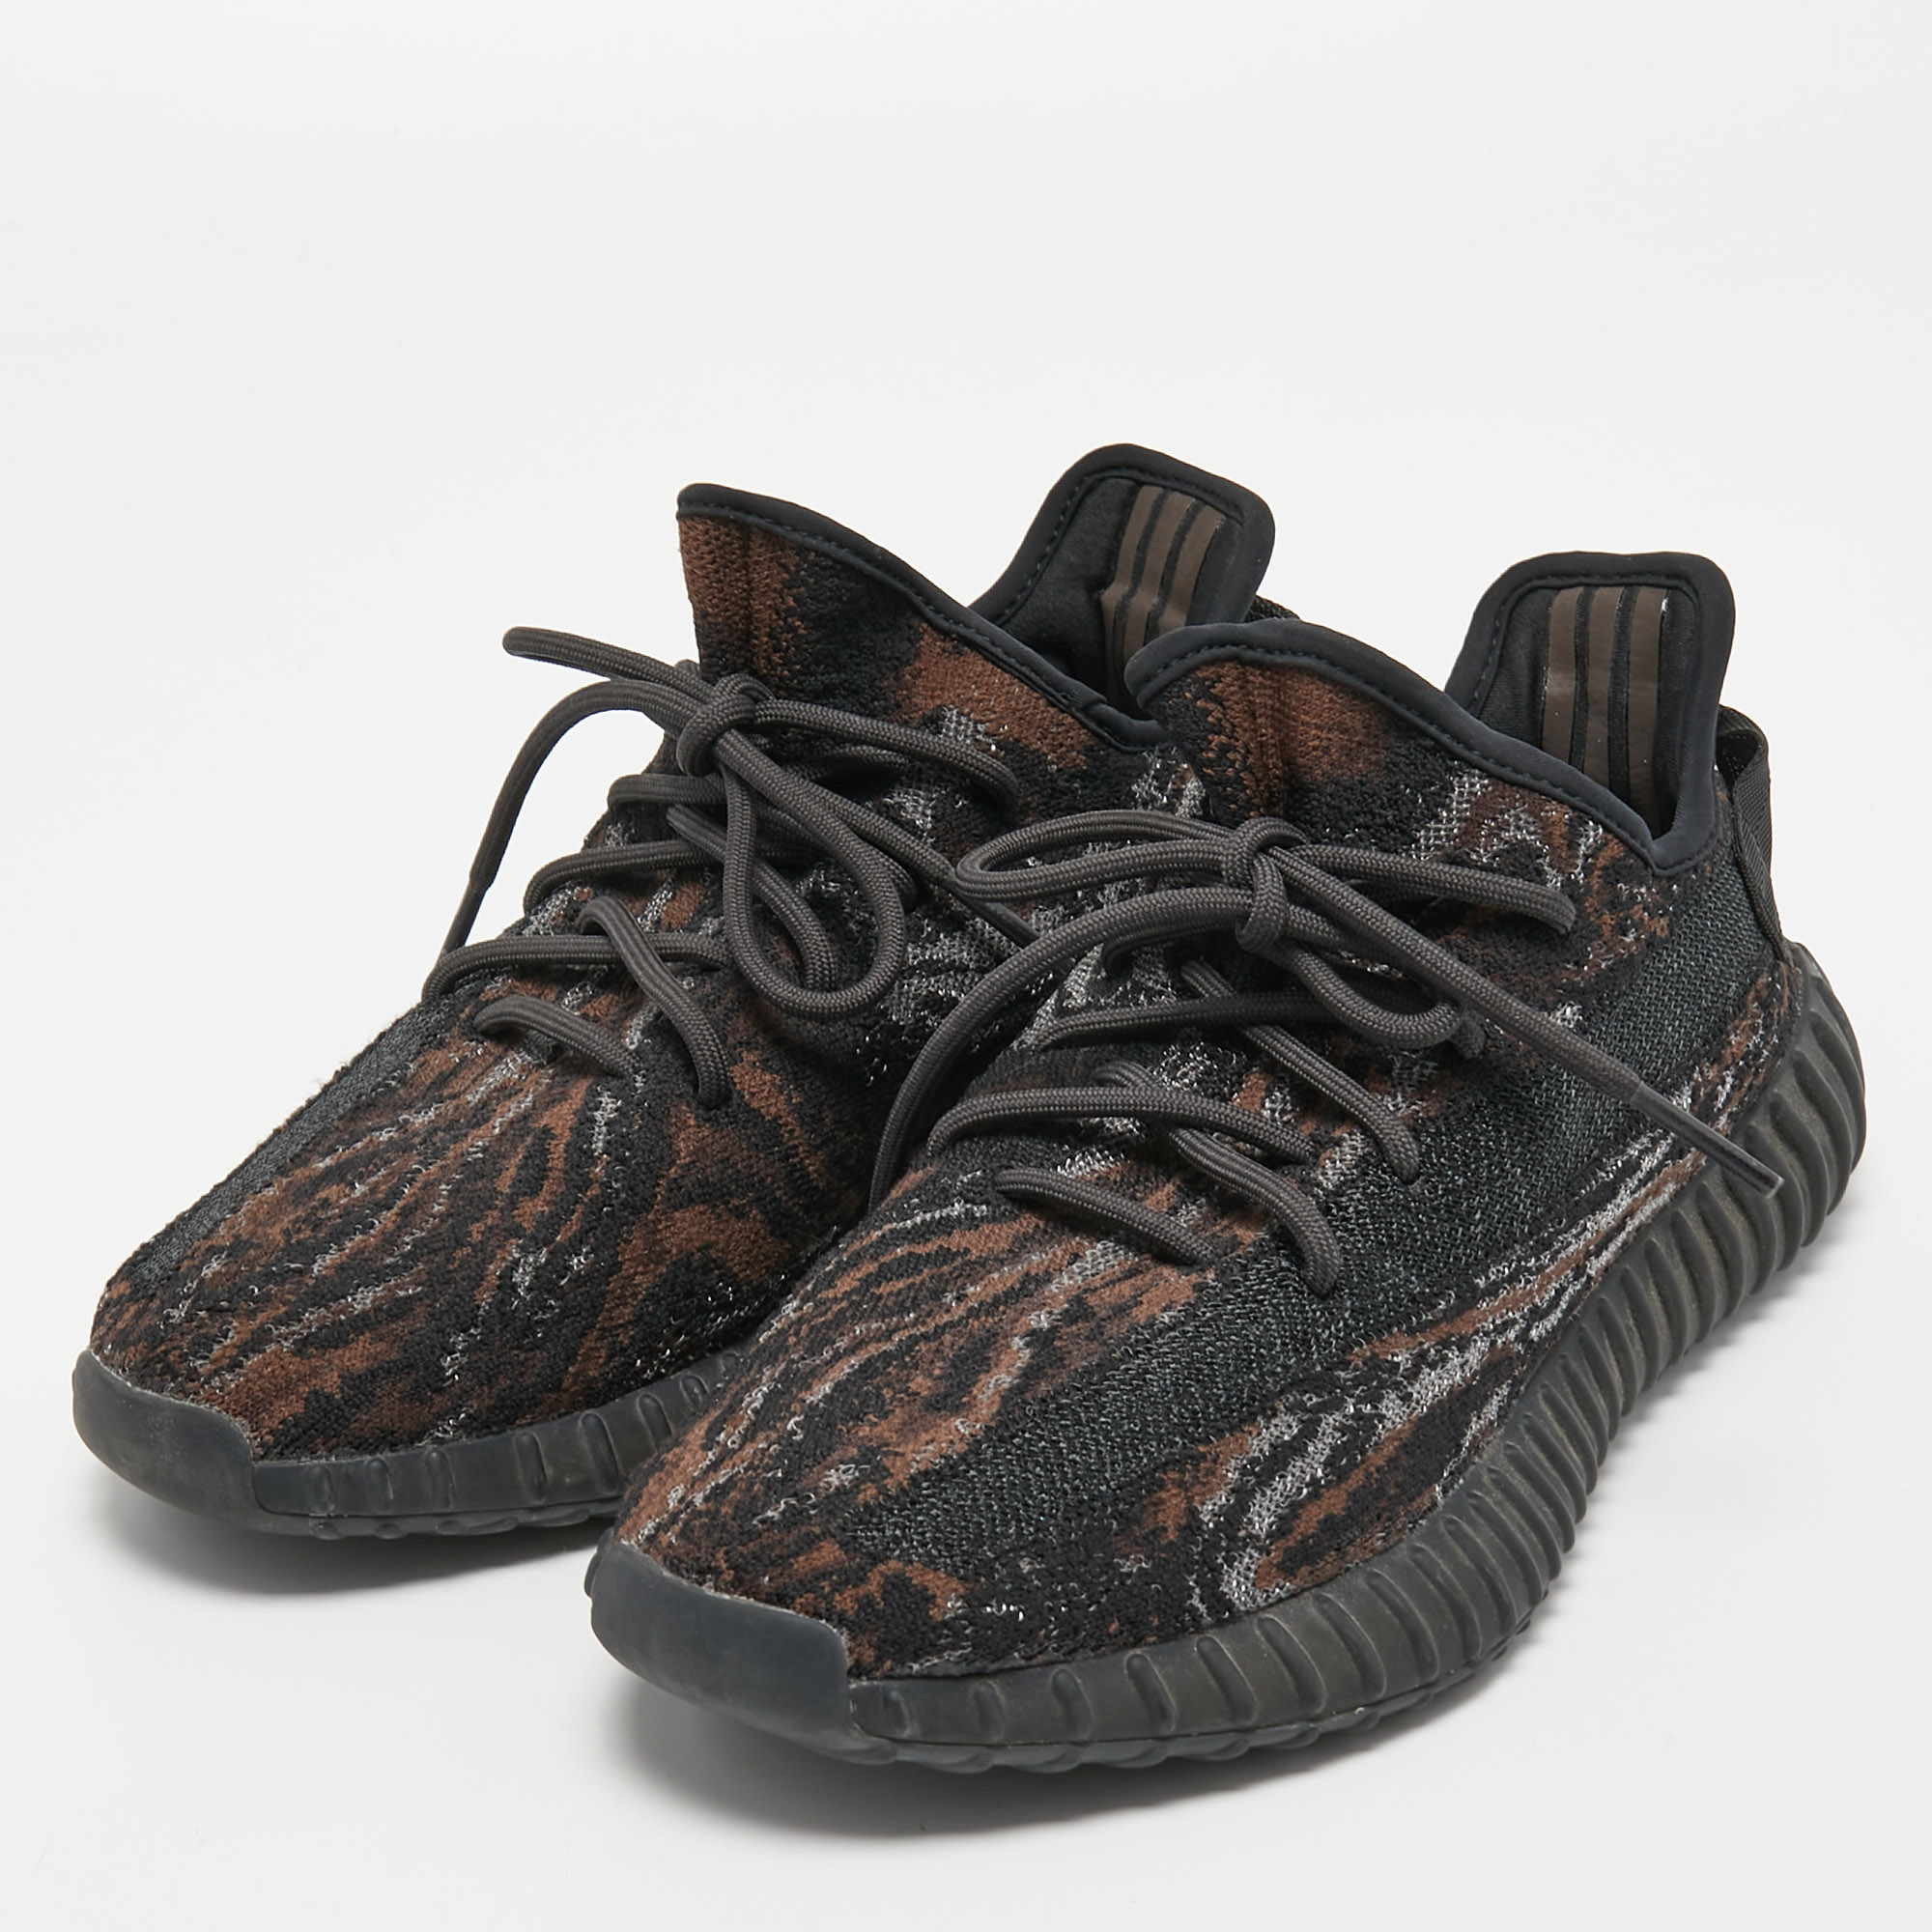 

Yeezy X Adidas Black/Brown Knit Fabric Boost 350 V2 -Mx-Rock Sneakers Size